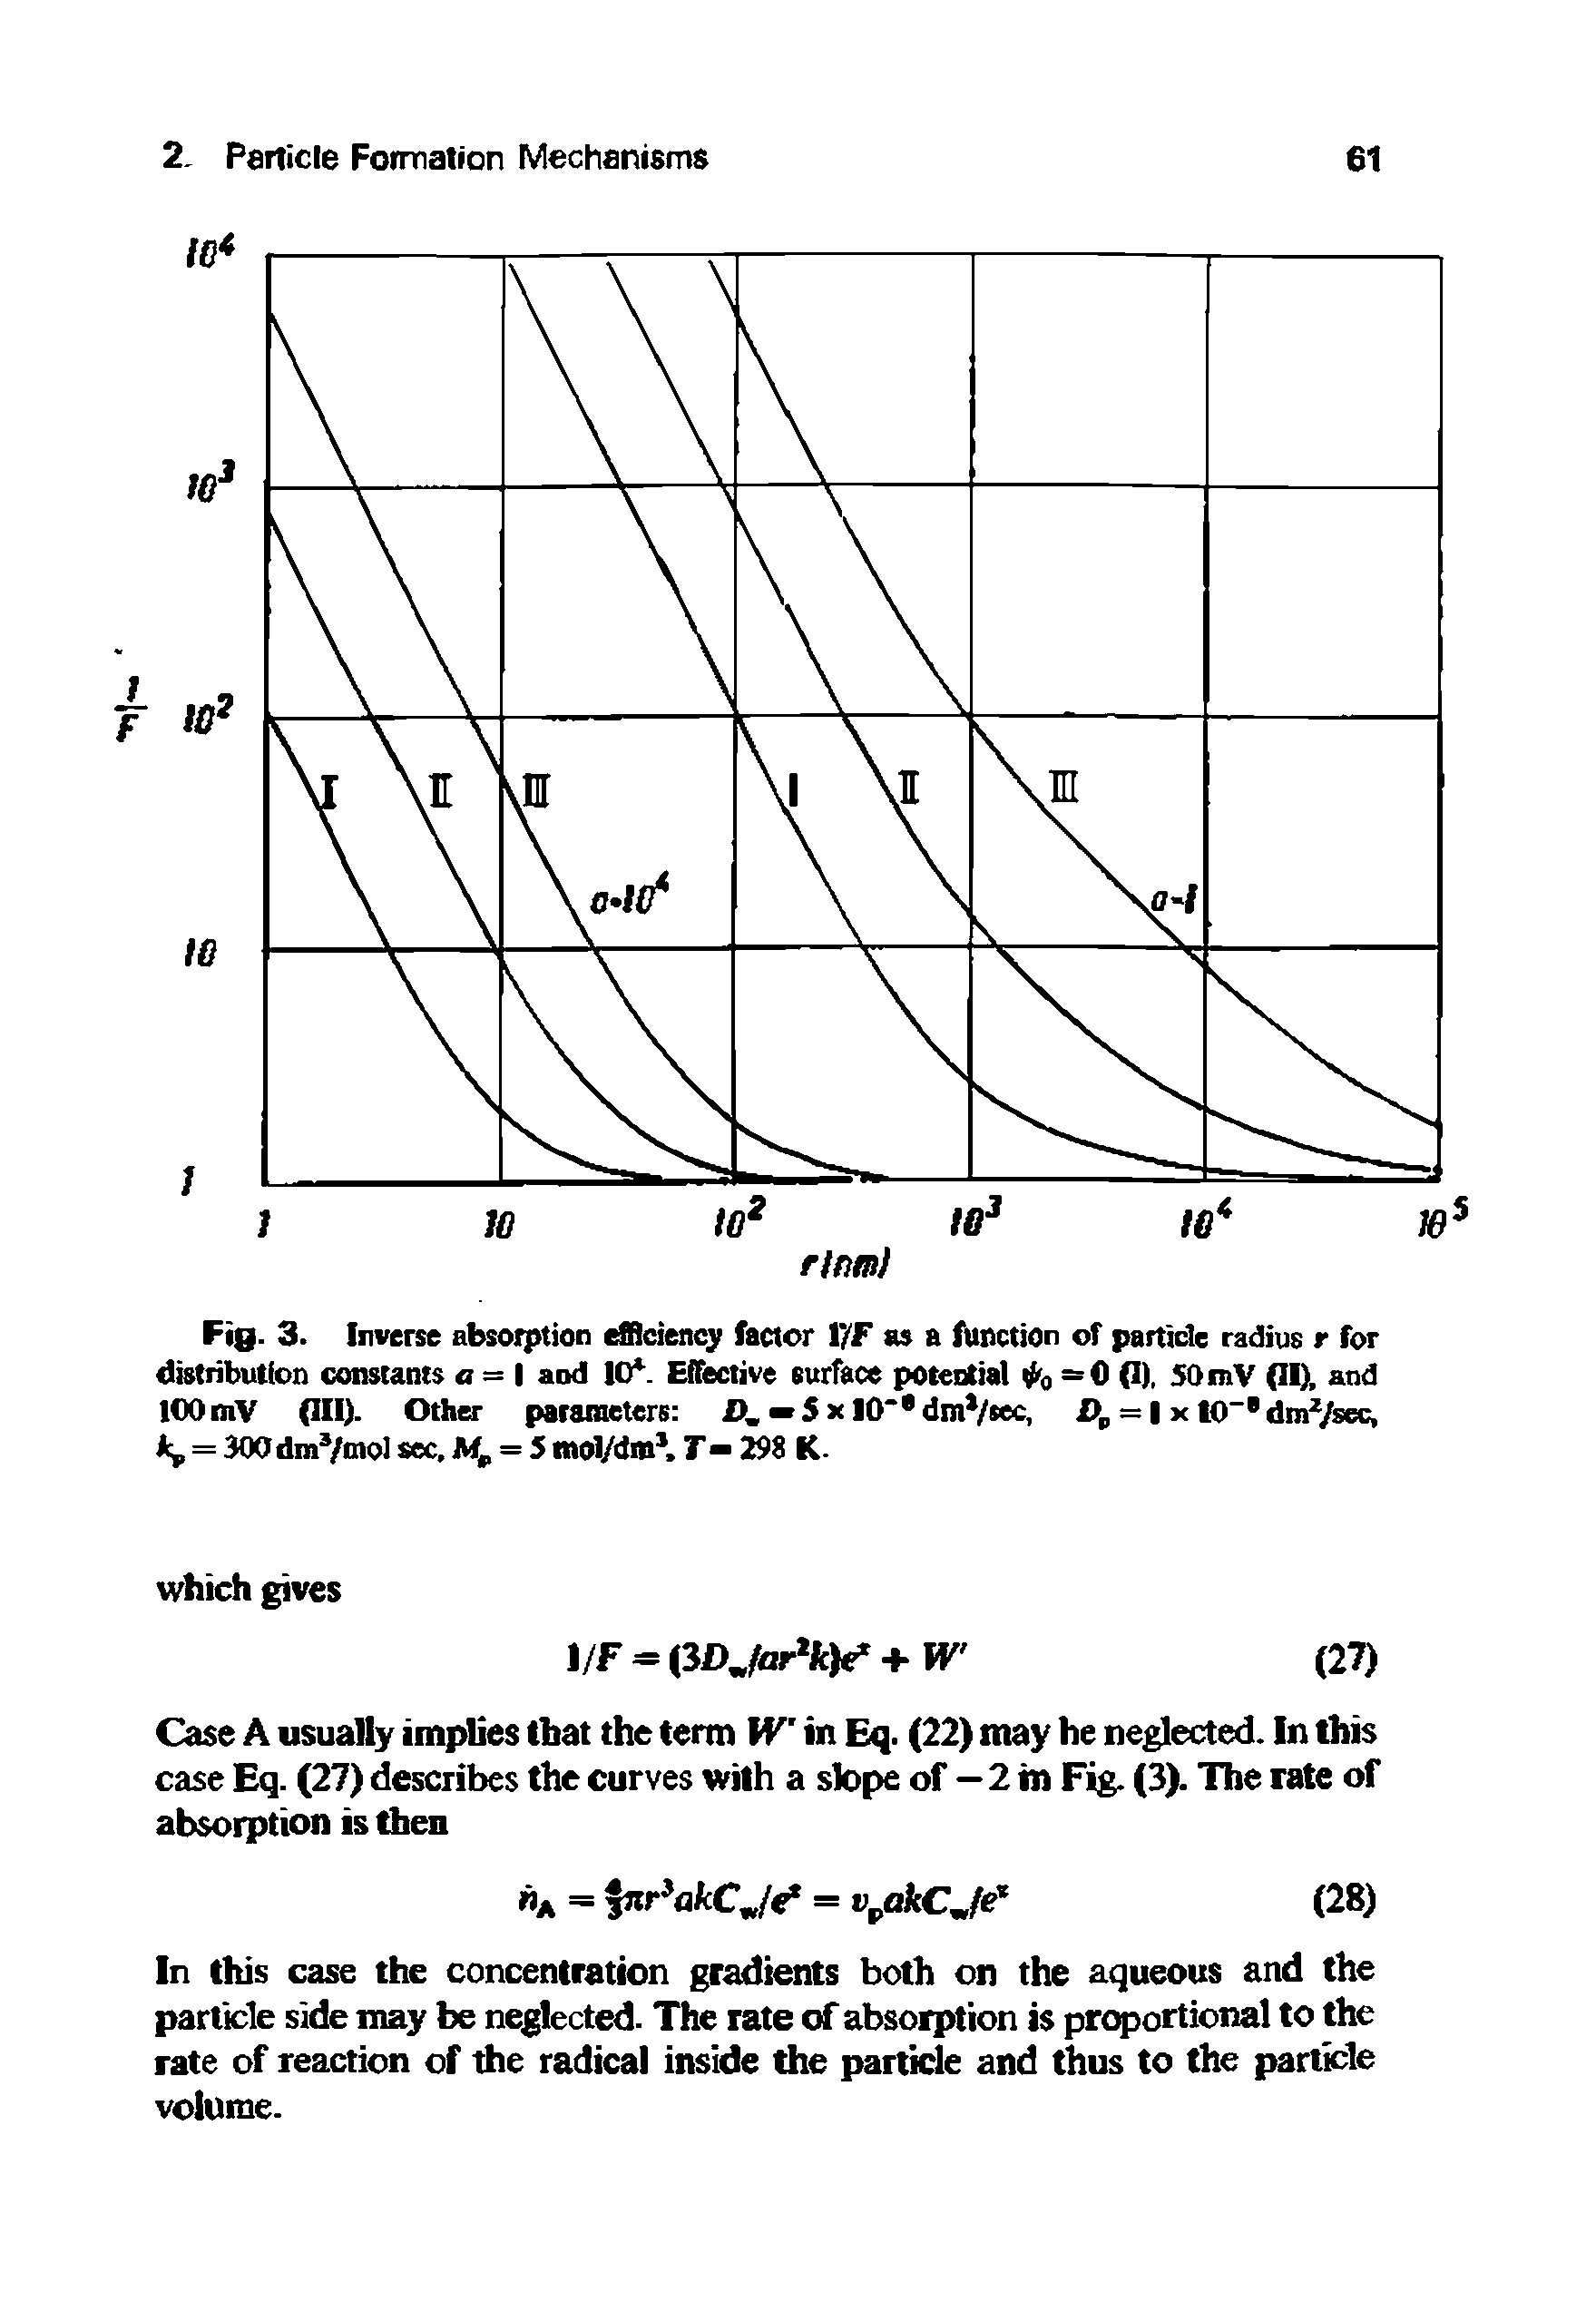 Fig. 3. Inverse absorption efficiency factor I /F as a function of particle radius r for distribution constants a = I and 10. Effective surface potential ti o =°6 (I). SO mV (II), and lOOmV PII). Other patameters ) = I x t0 dm sec,...